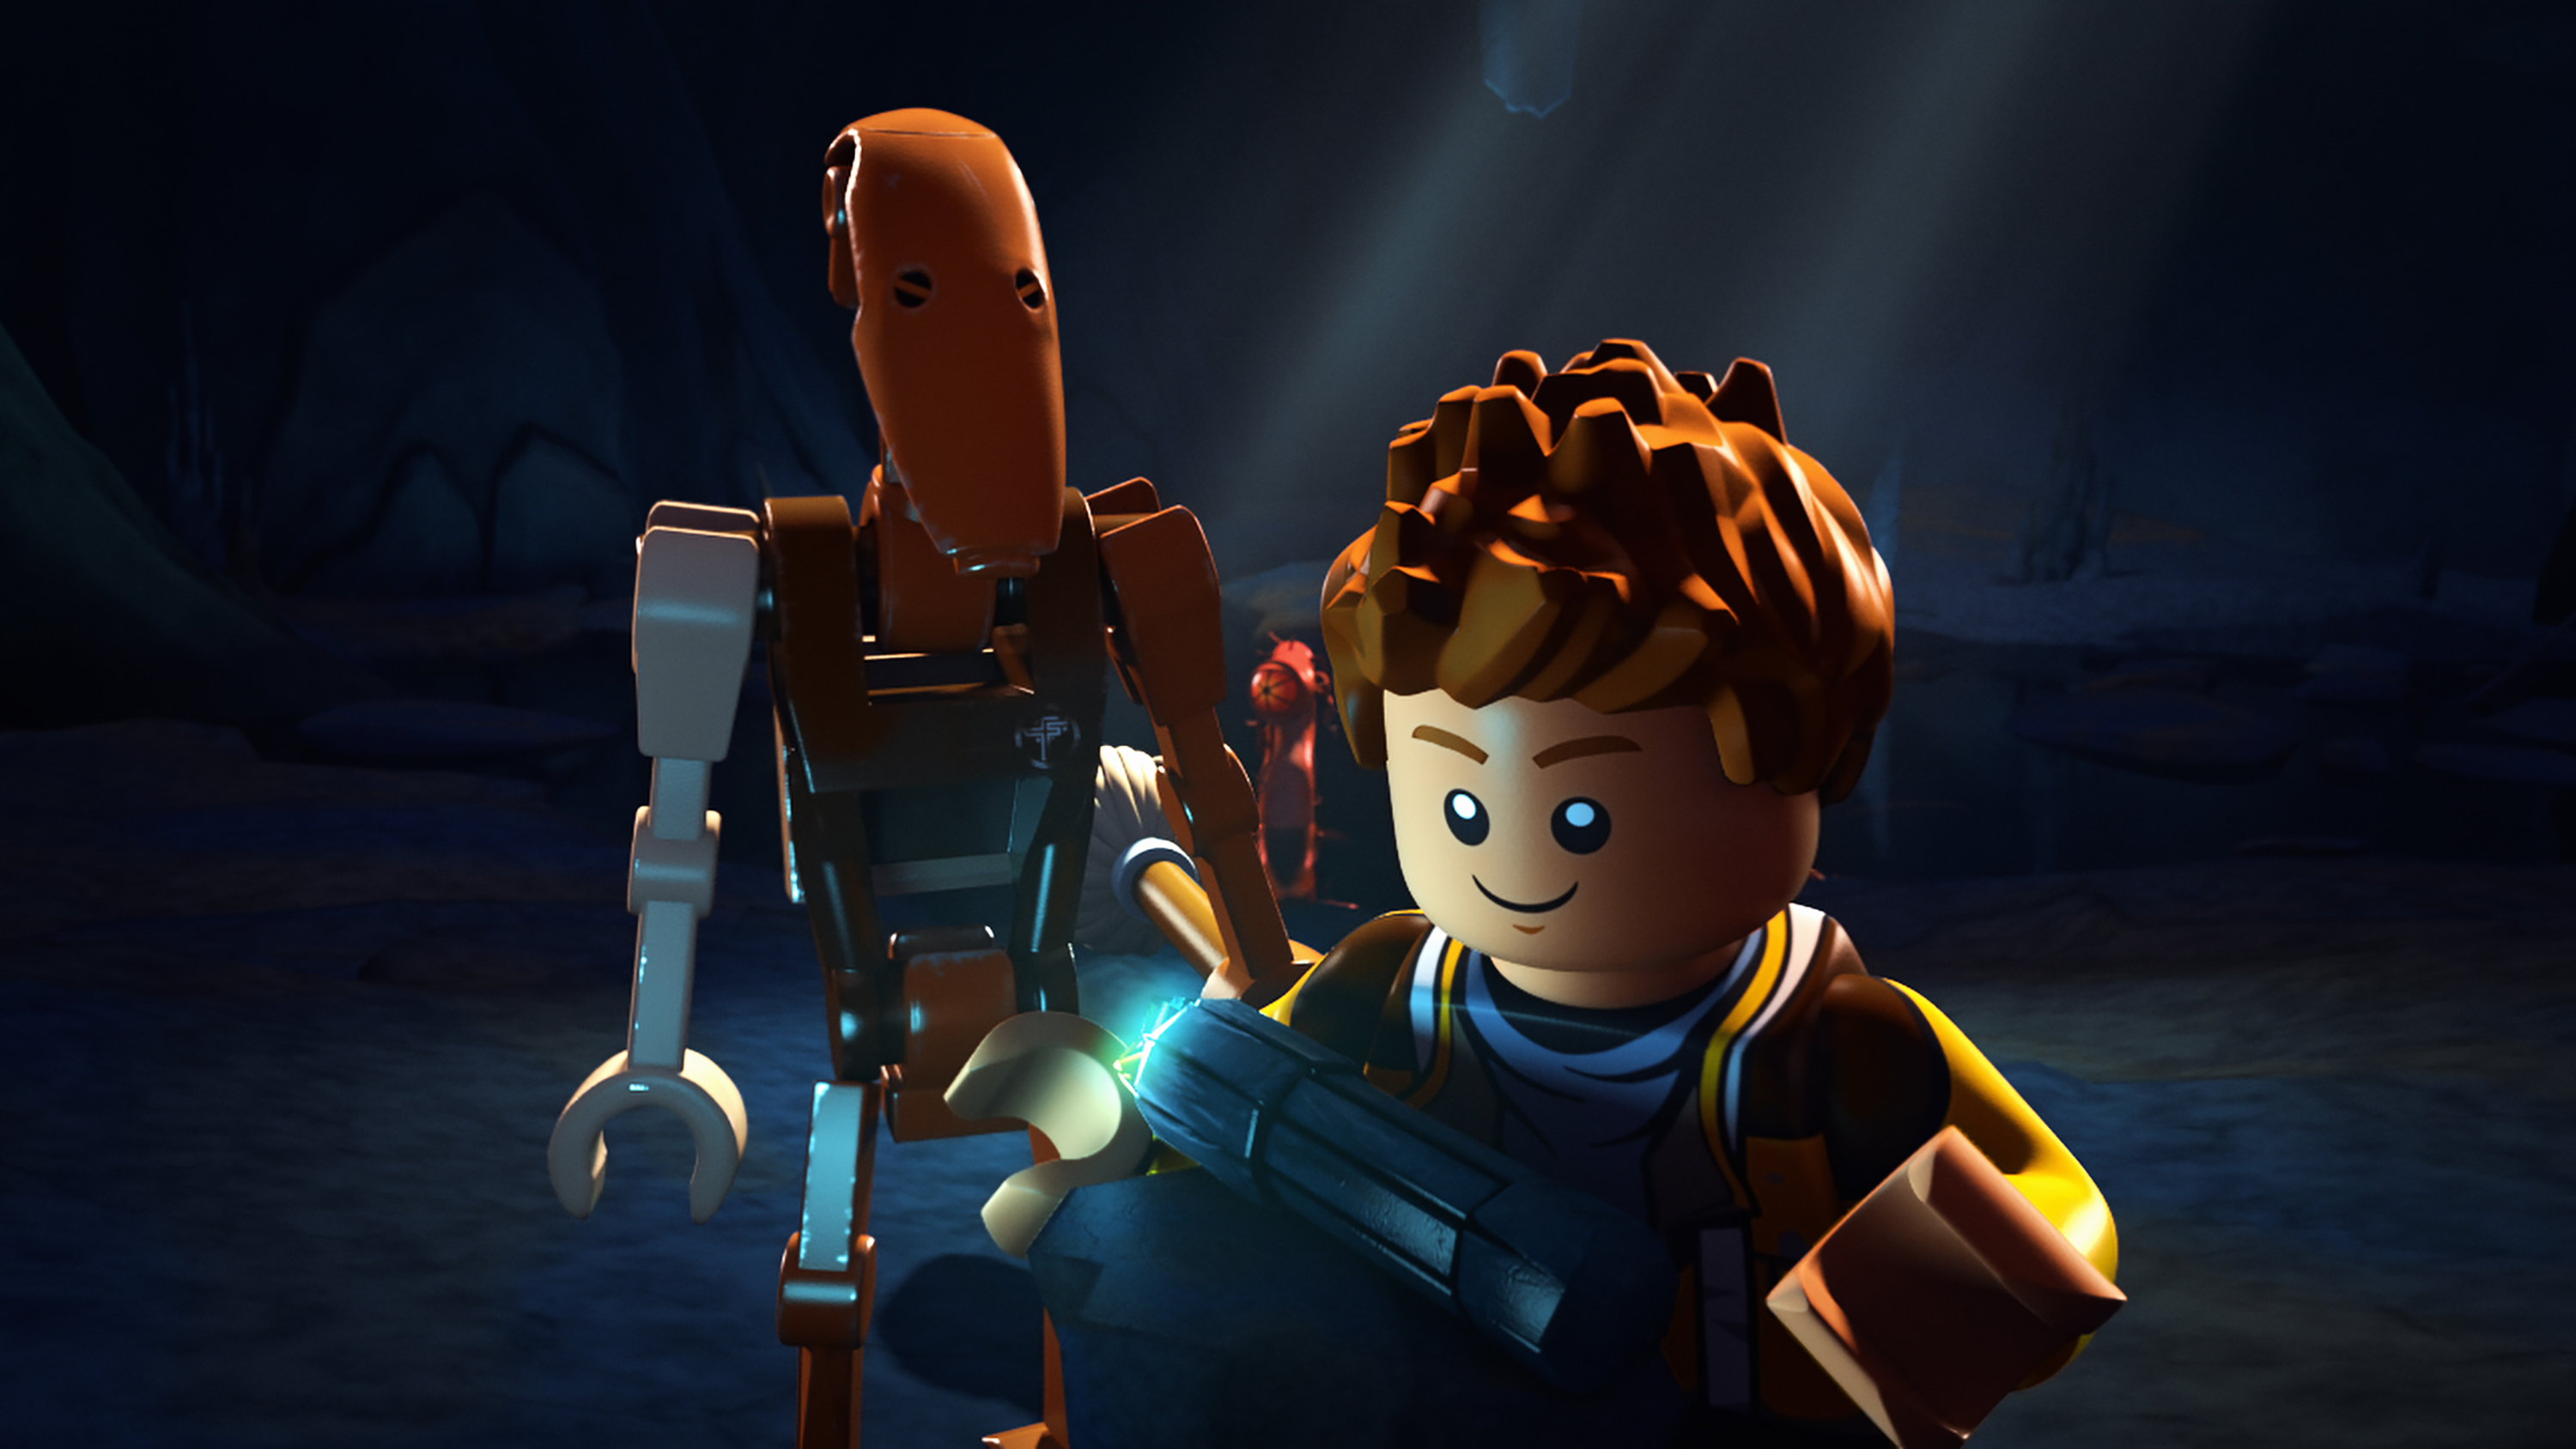 LEGO STAR WARS: THE FREEMAKER ADVENTURES - Introducing new heroes and villains to the LEGO Star Wars universe, the animated television series "LEGO Star Wars: The Freemaker Adventures" will premiere MONDAY, JUNE 20 (10:00 a.m. EST) on Disney XD. (Disney XD).